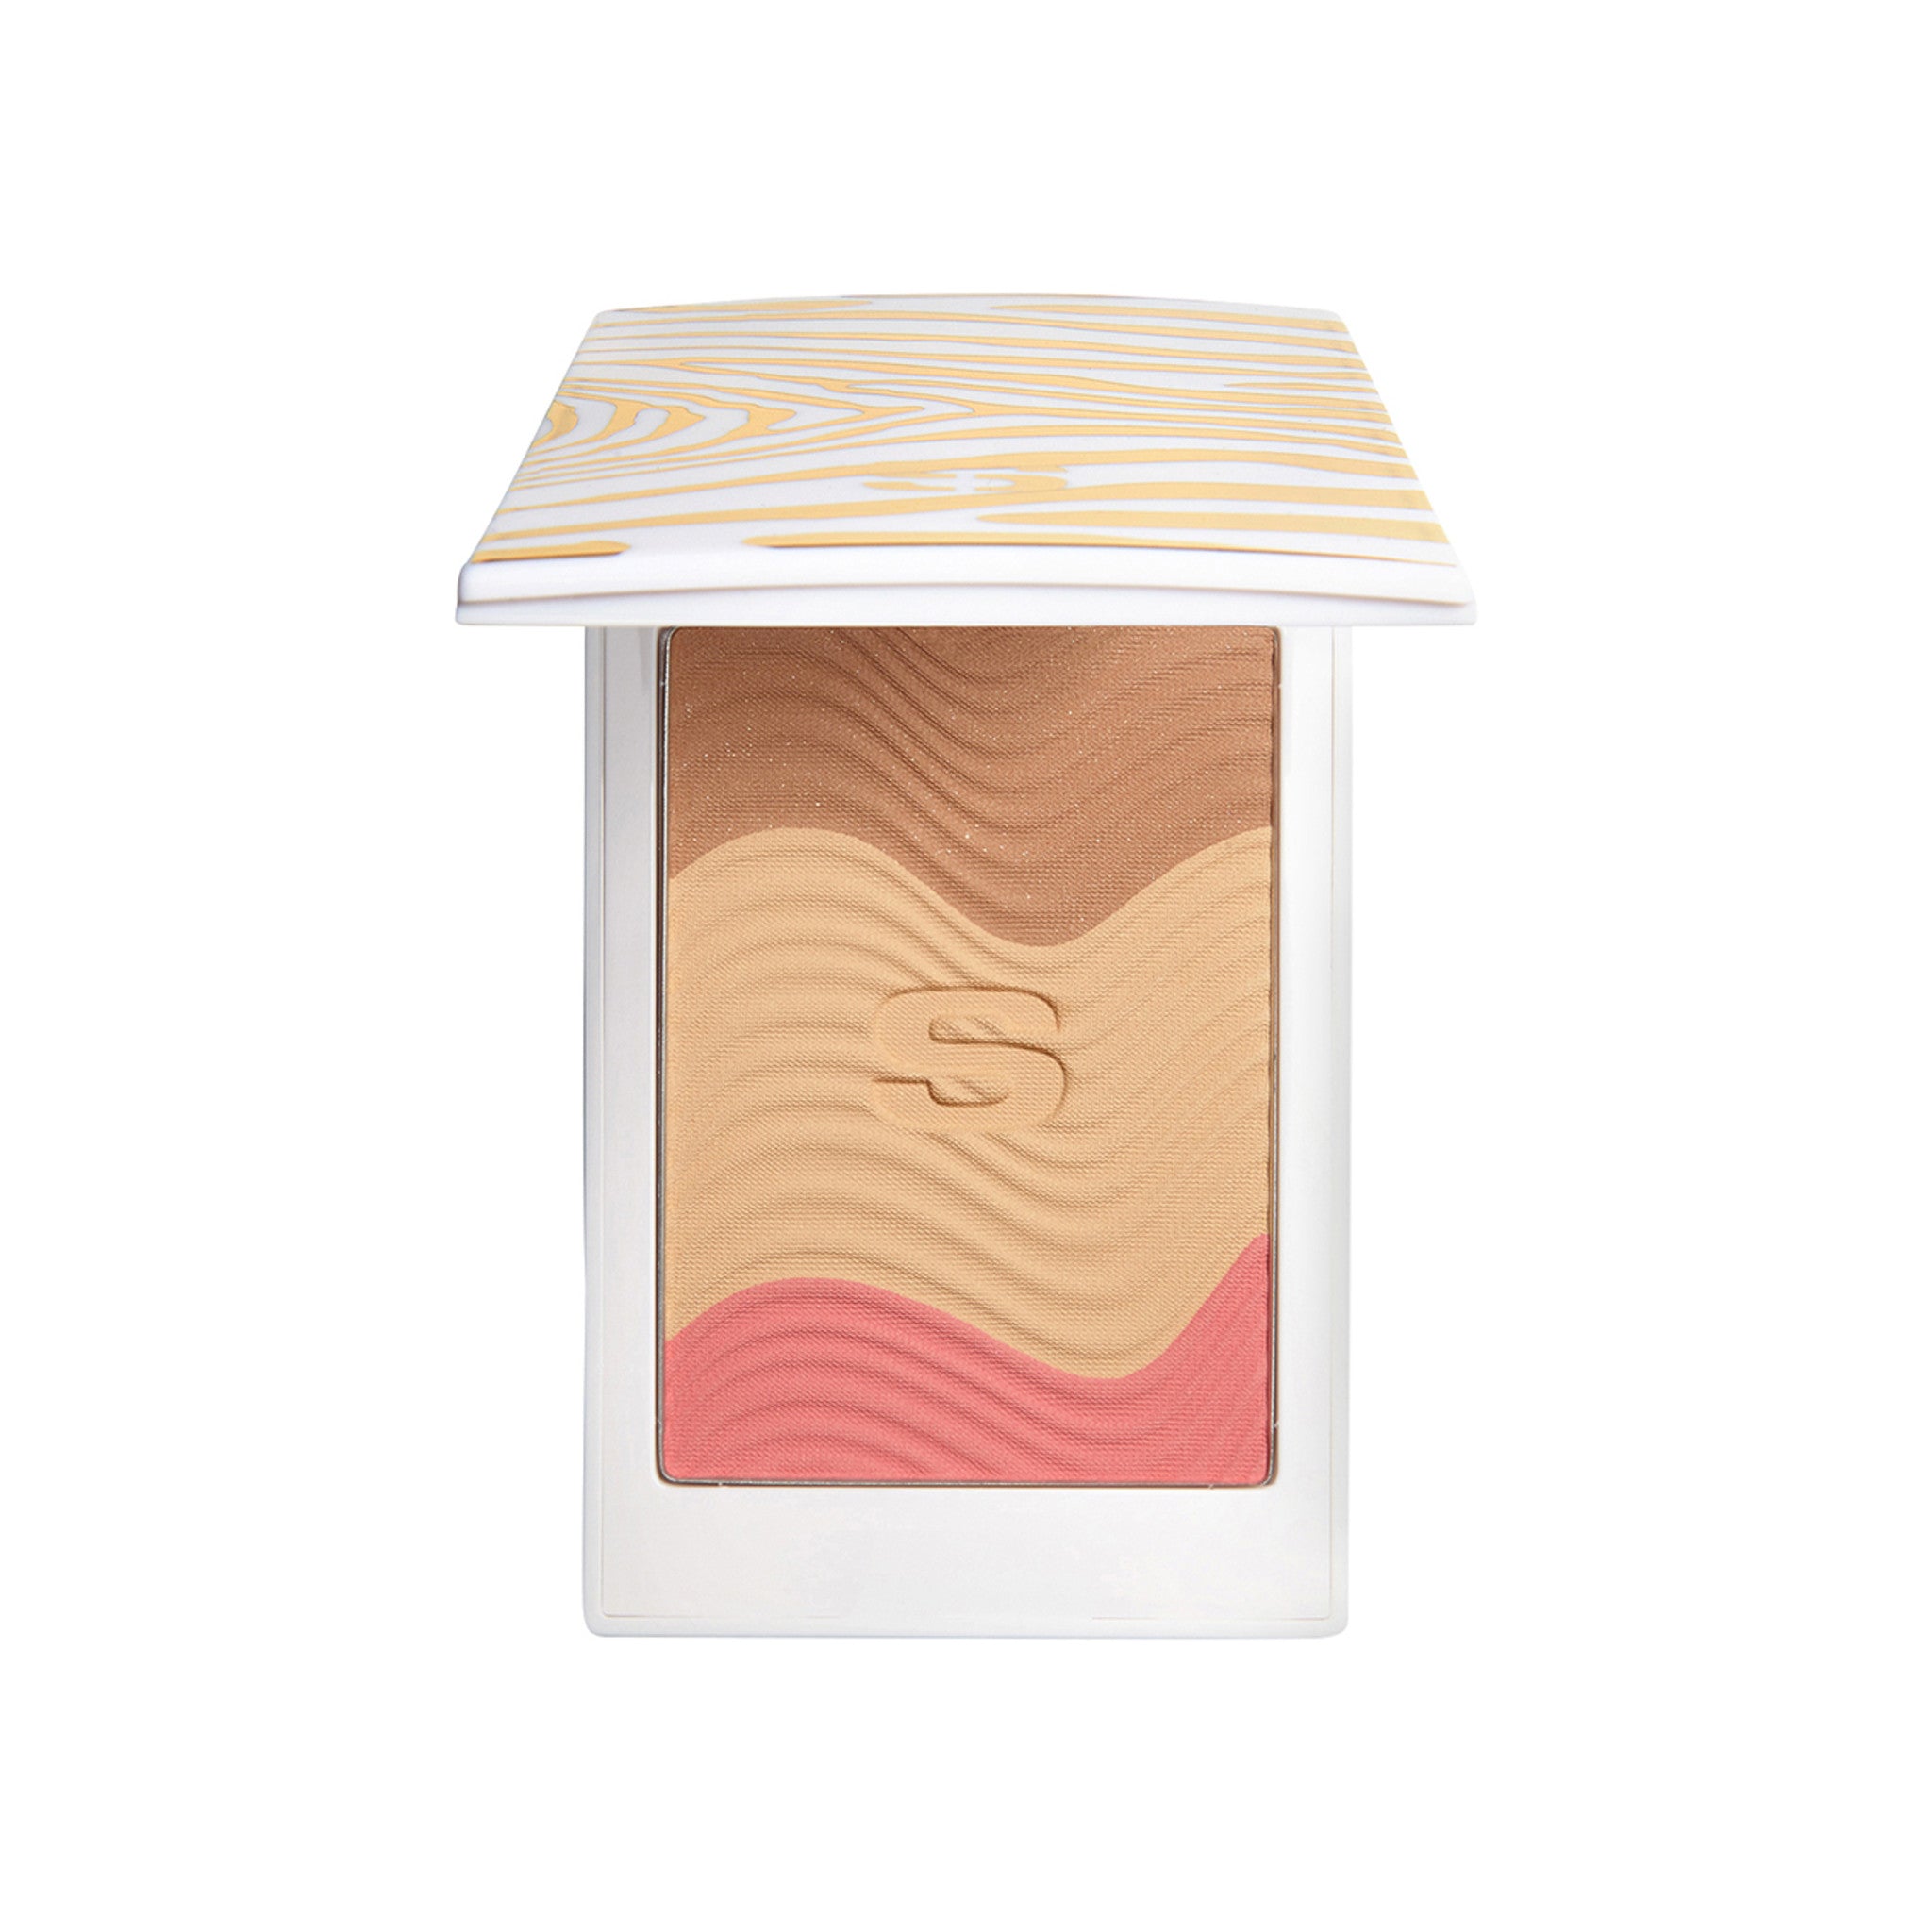 Sisley-Paris Phyto-Touche Sun Glow Powder Color/Shade variant: Peche Doree Trio main image. This product is in the color pink